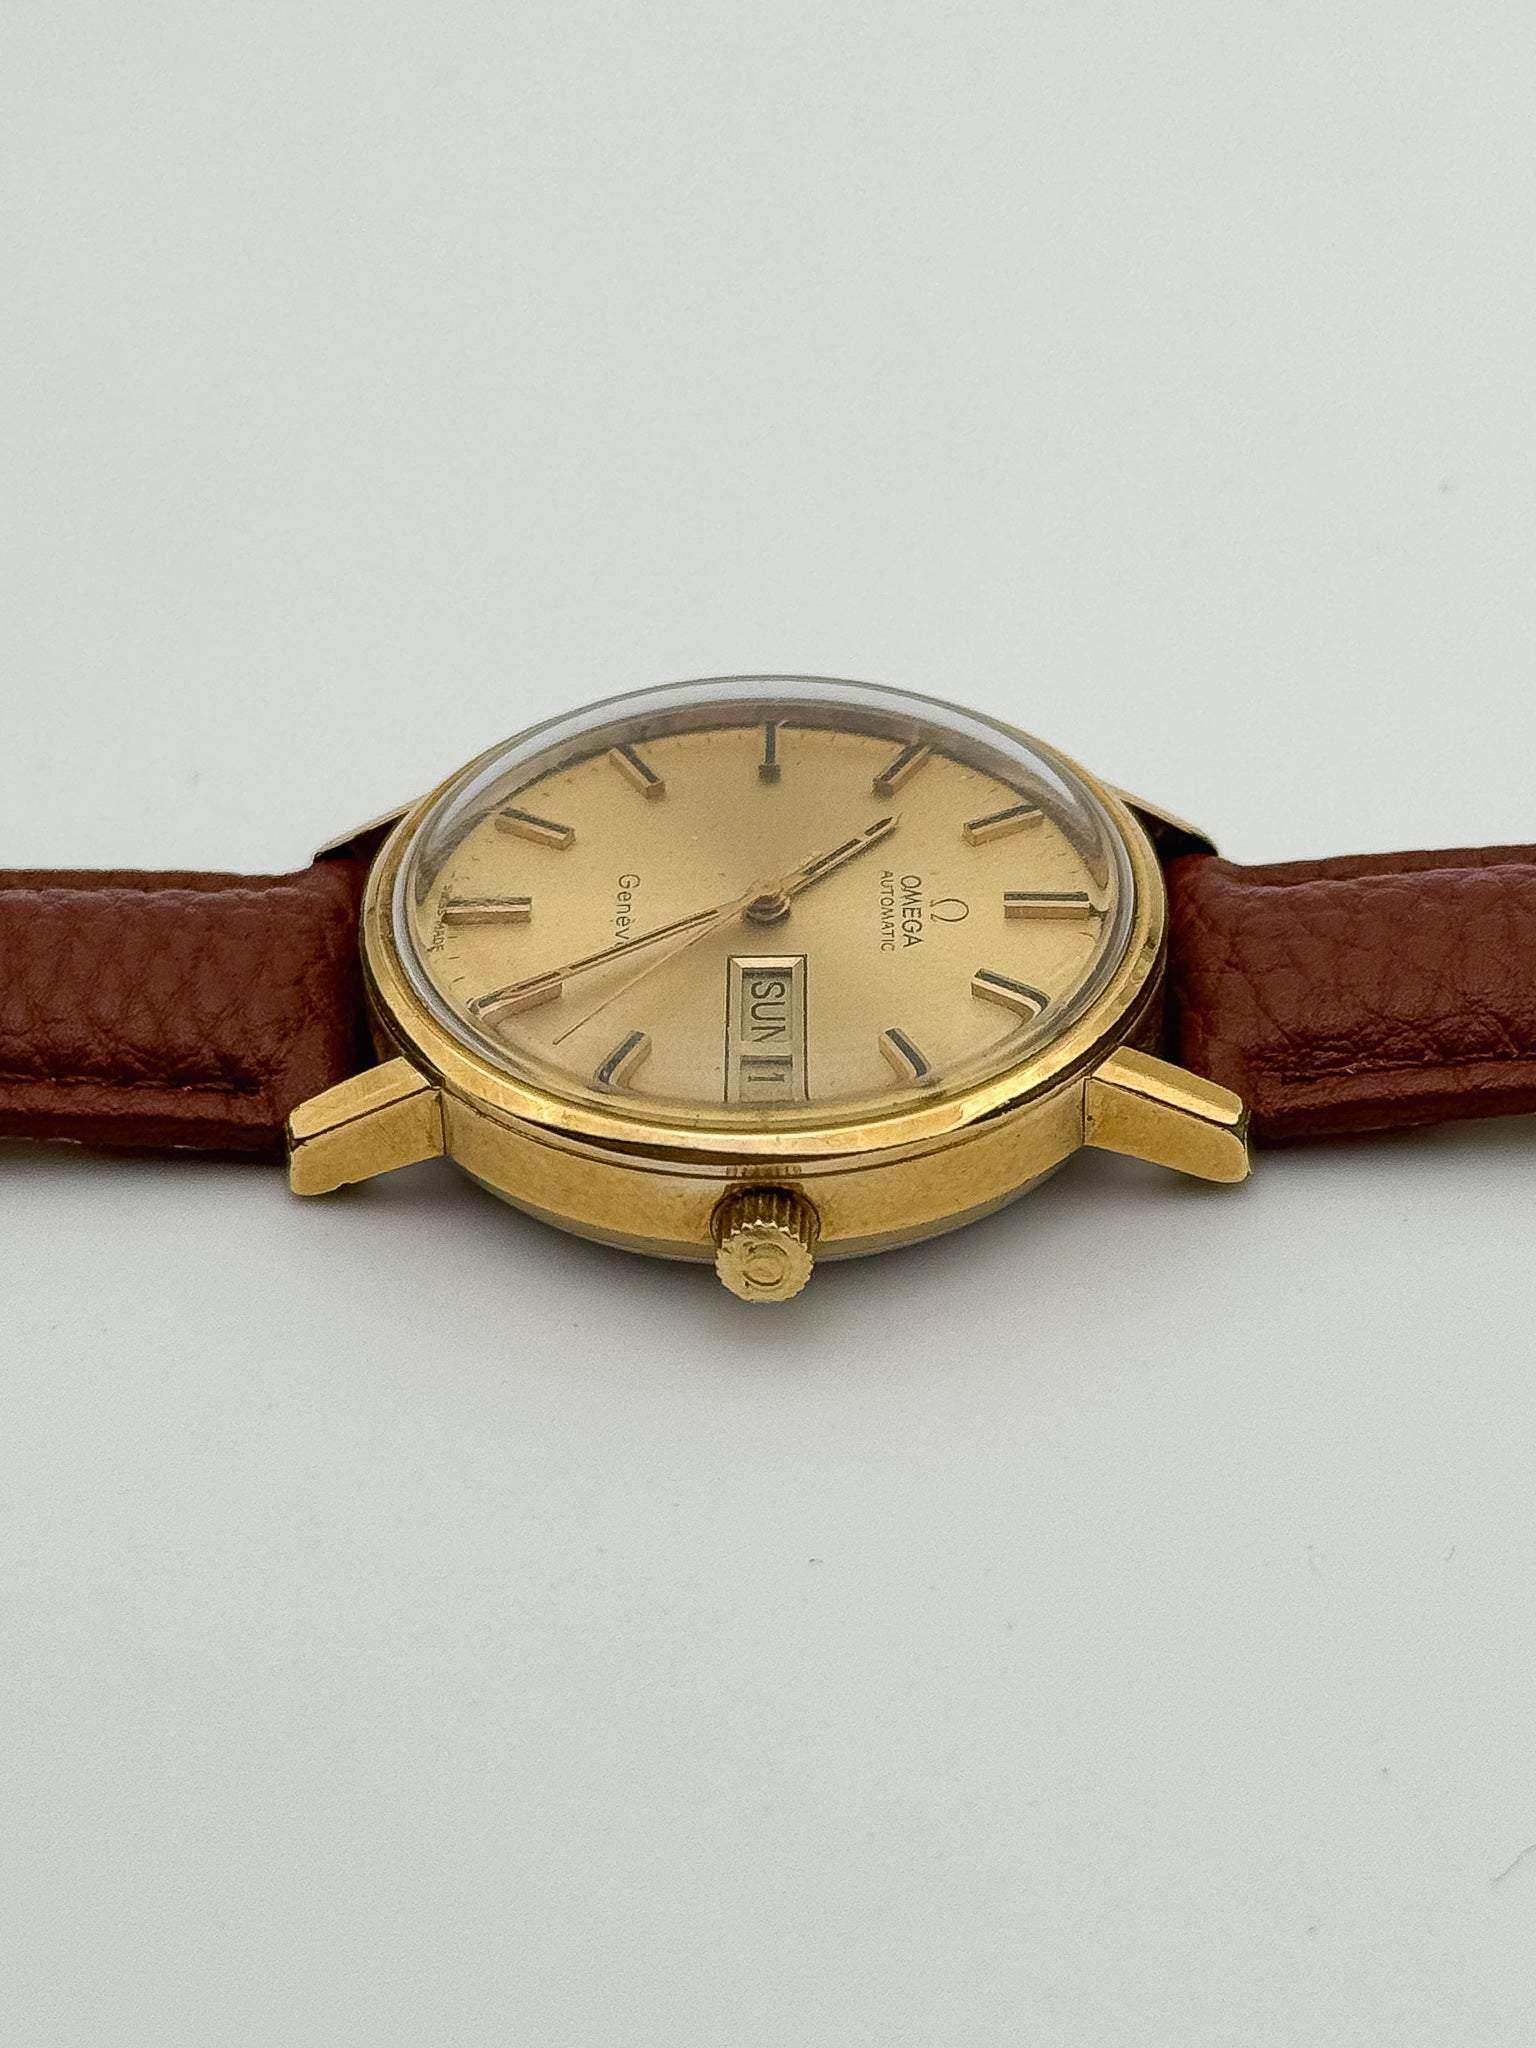 Omega - Genève Gold Plated Daydate - 1973 - Atelier Victor